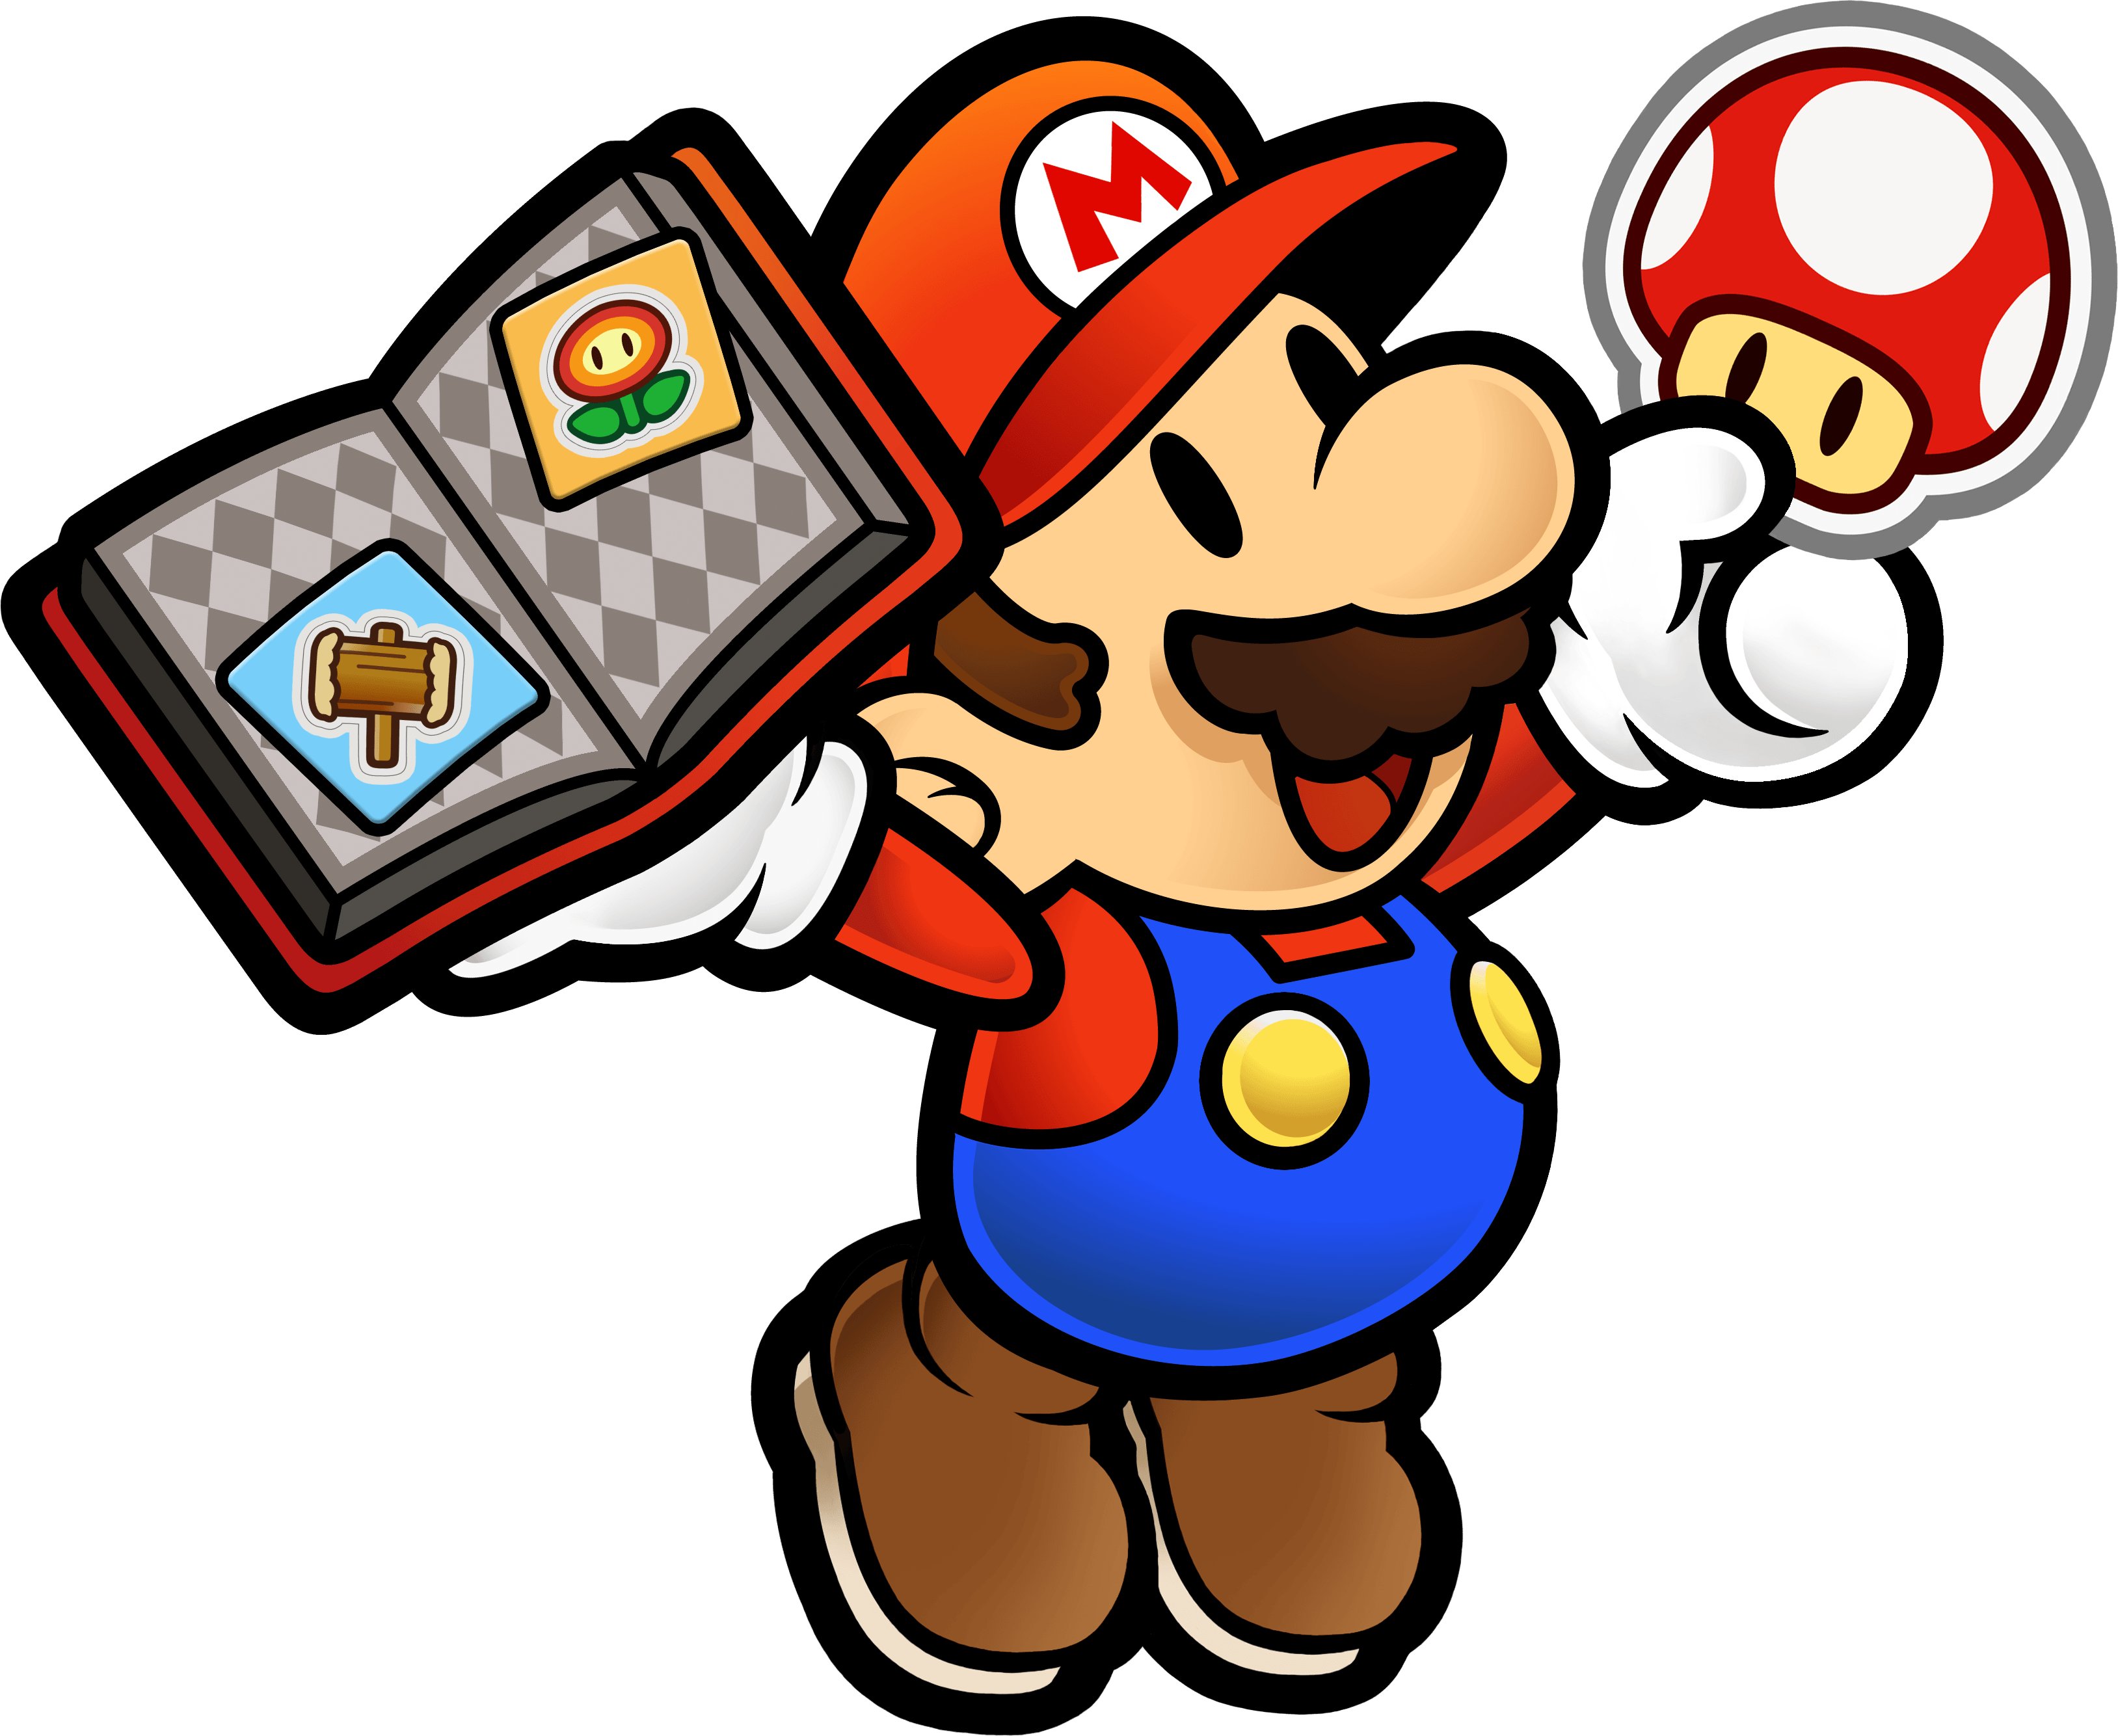 Paper Mario with a Mushroom sticker to add to his sticker book. 